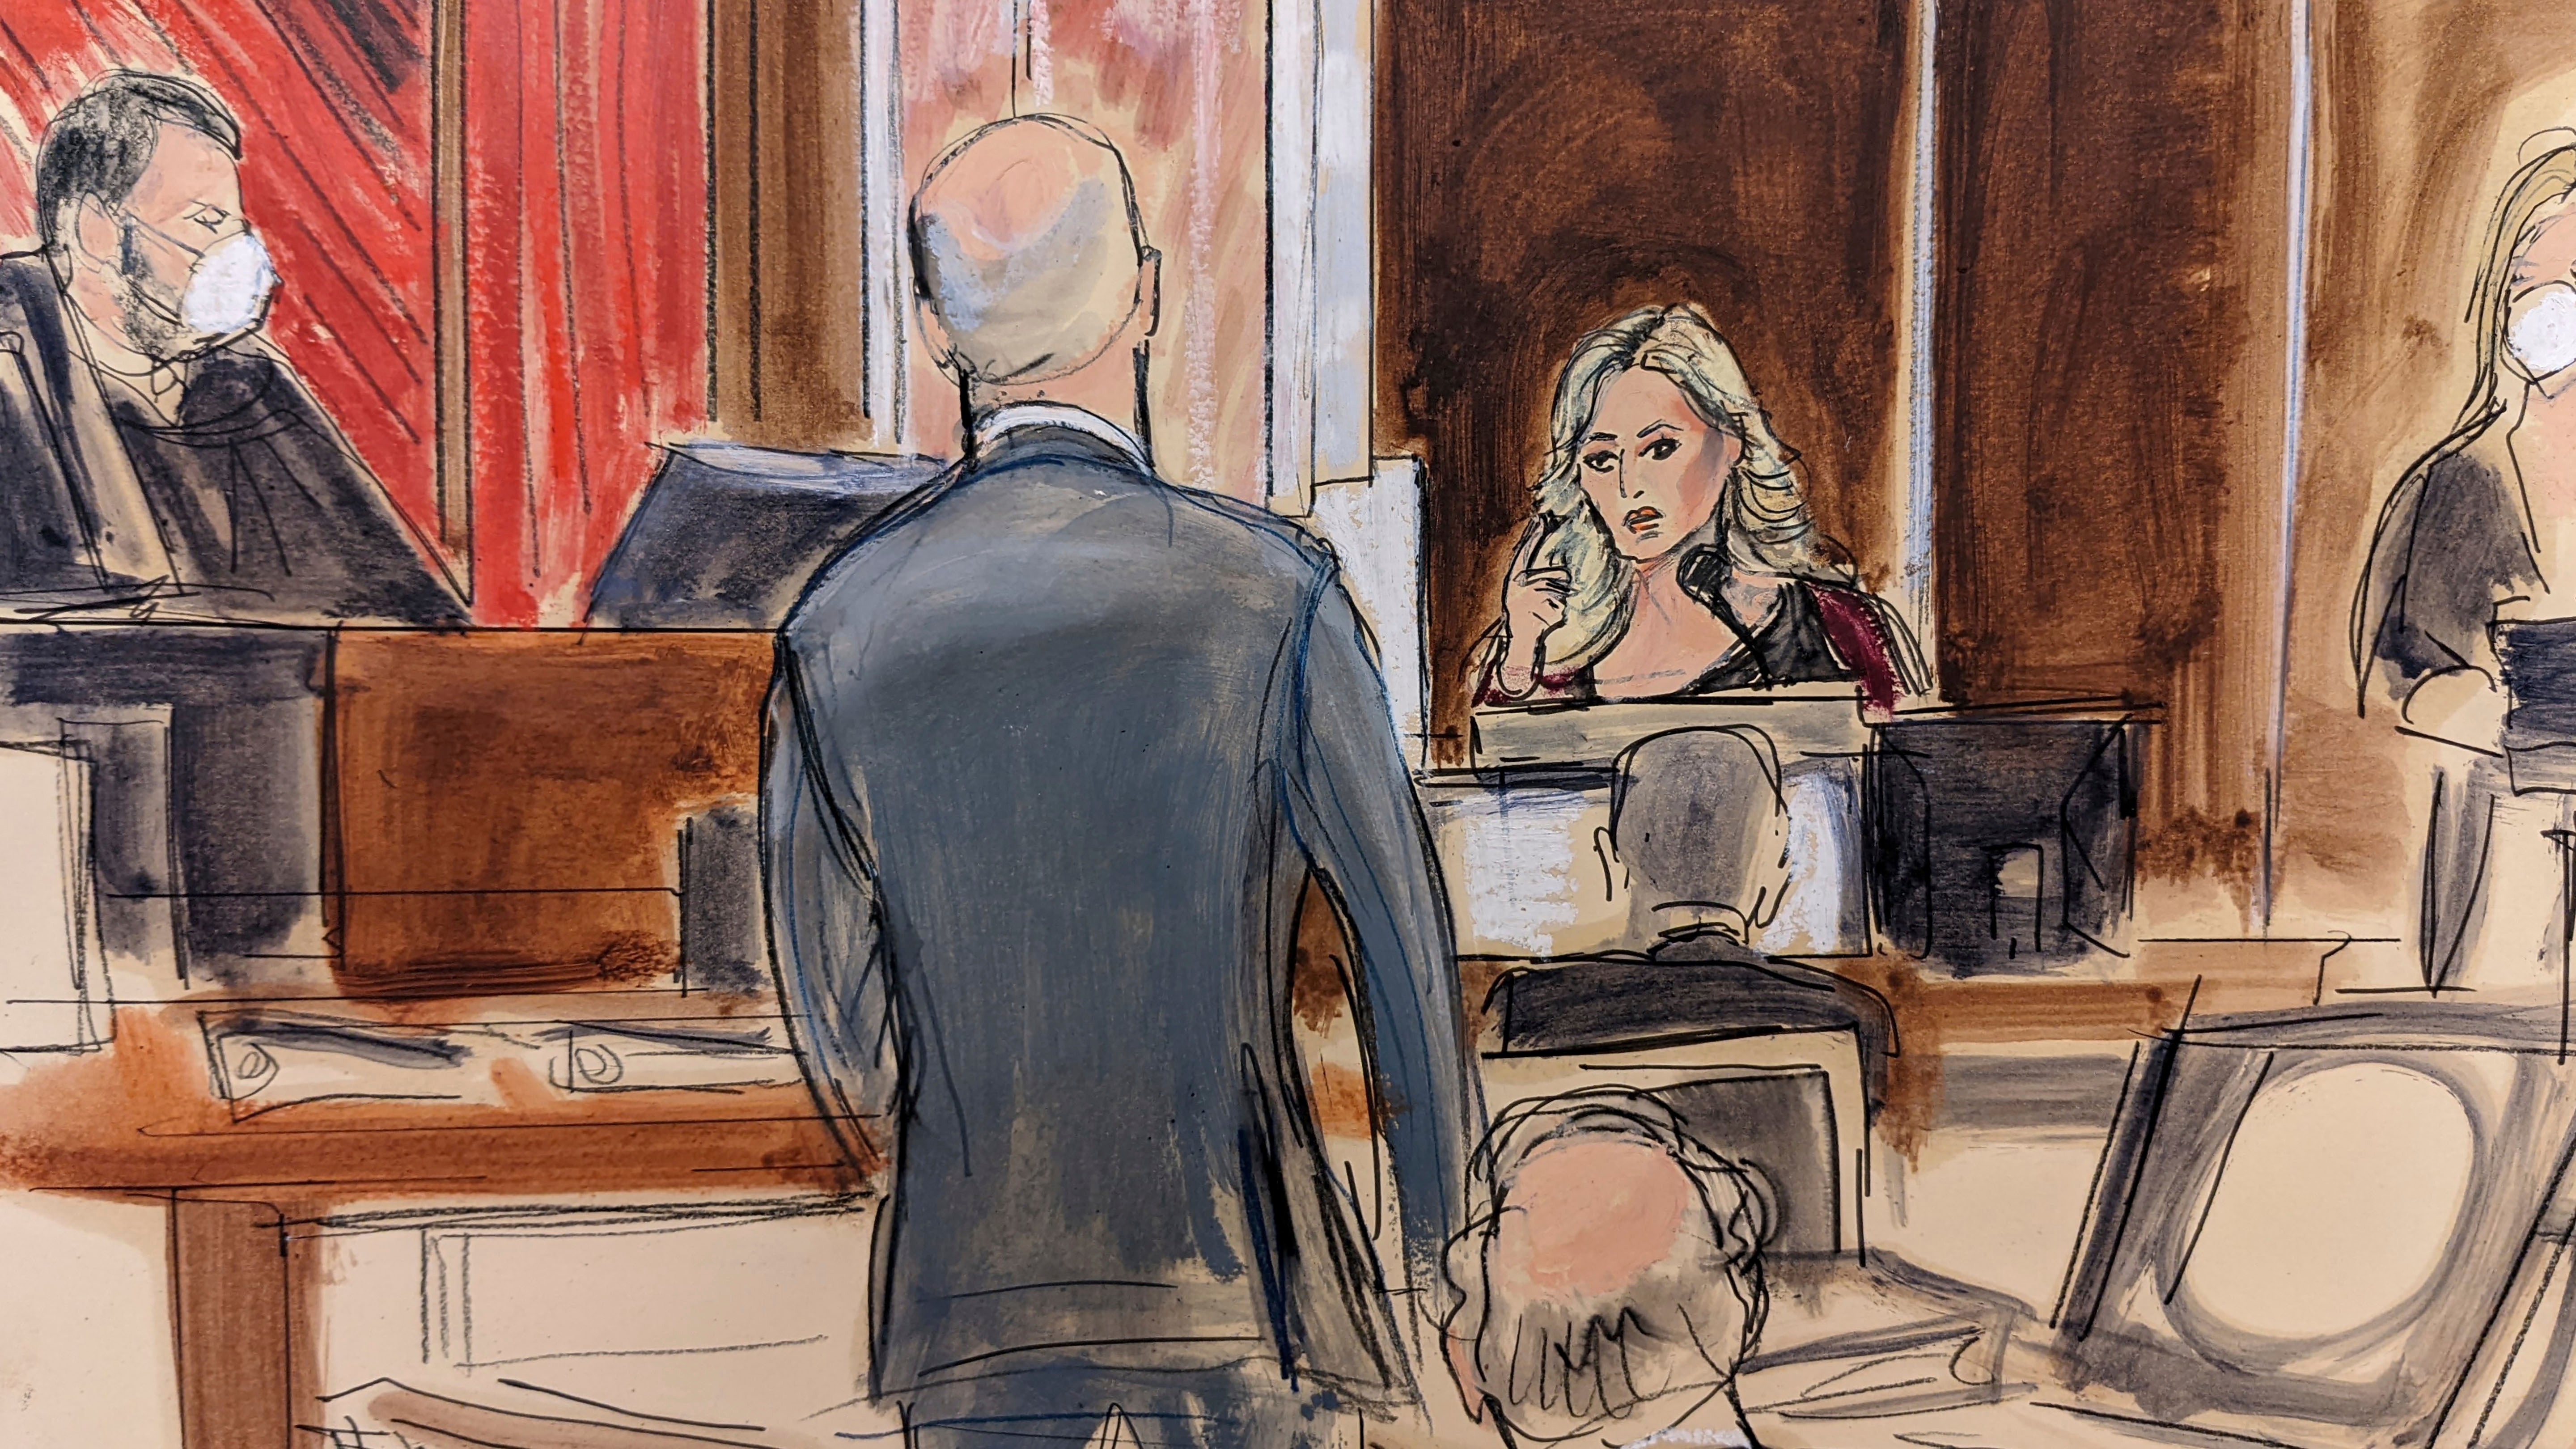 Stormy Daniels testifying on the witness stand, at right, points to Michael Avenatti, standing at center. Judge Jesse Furman presides on the bench